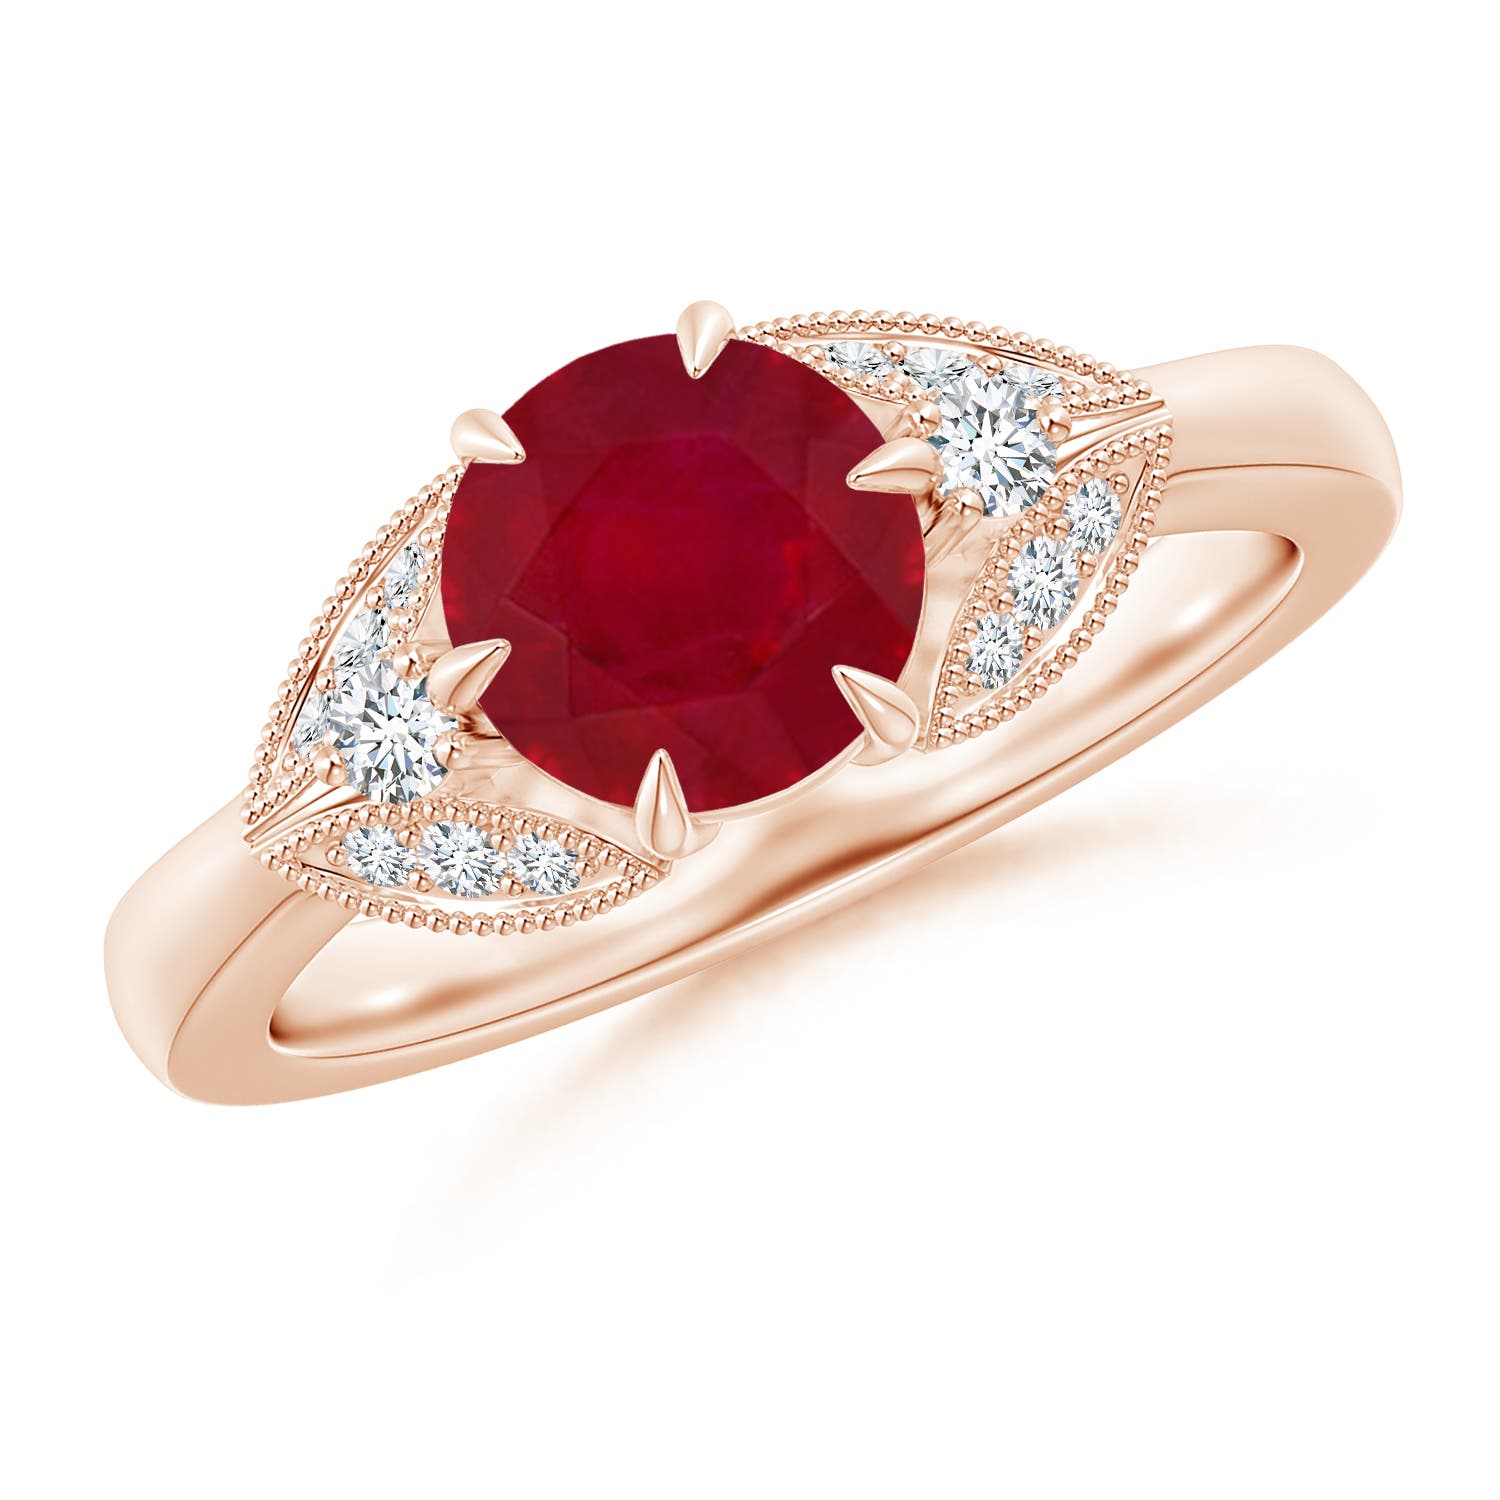 AA - Ruby / 1.64 CT / 14 KT Rose Gold